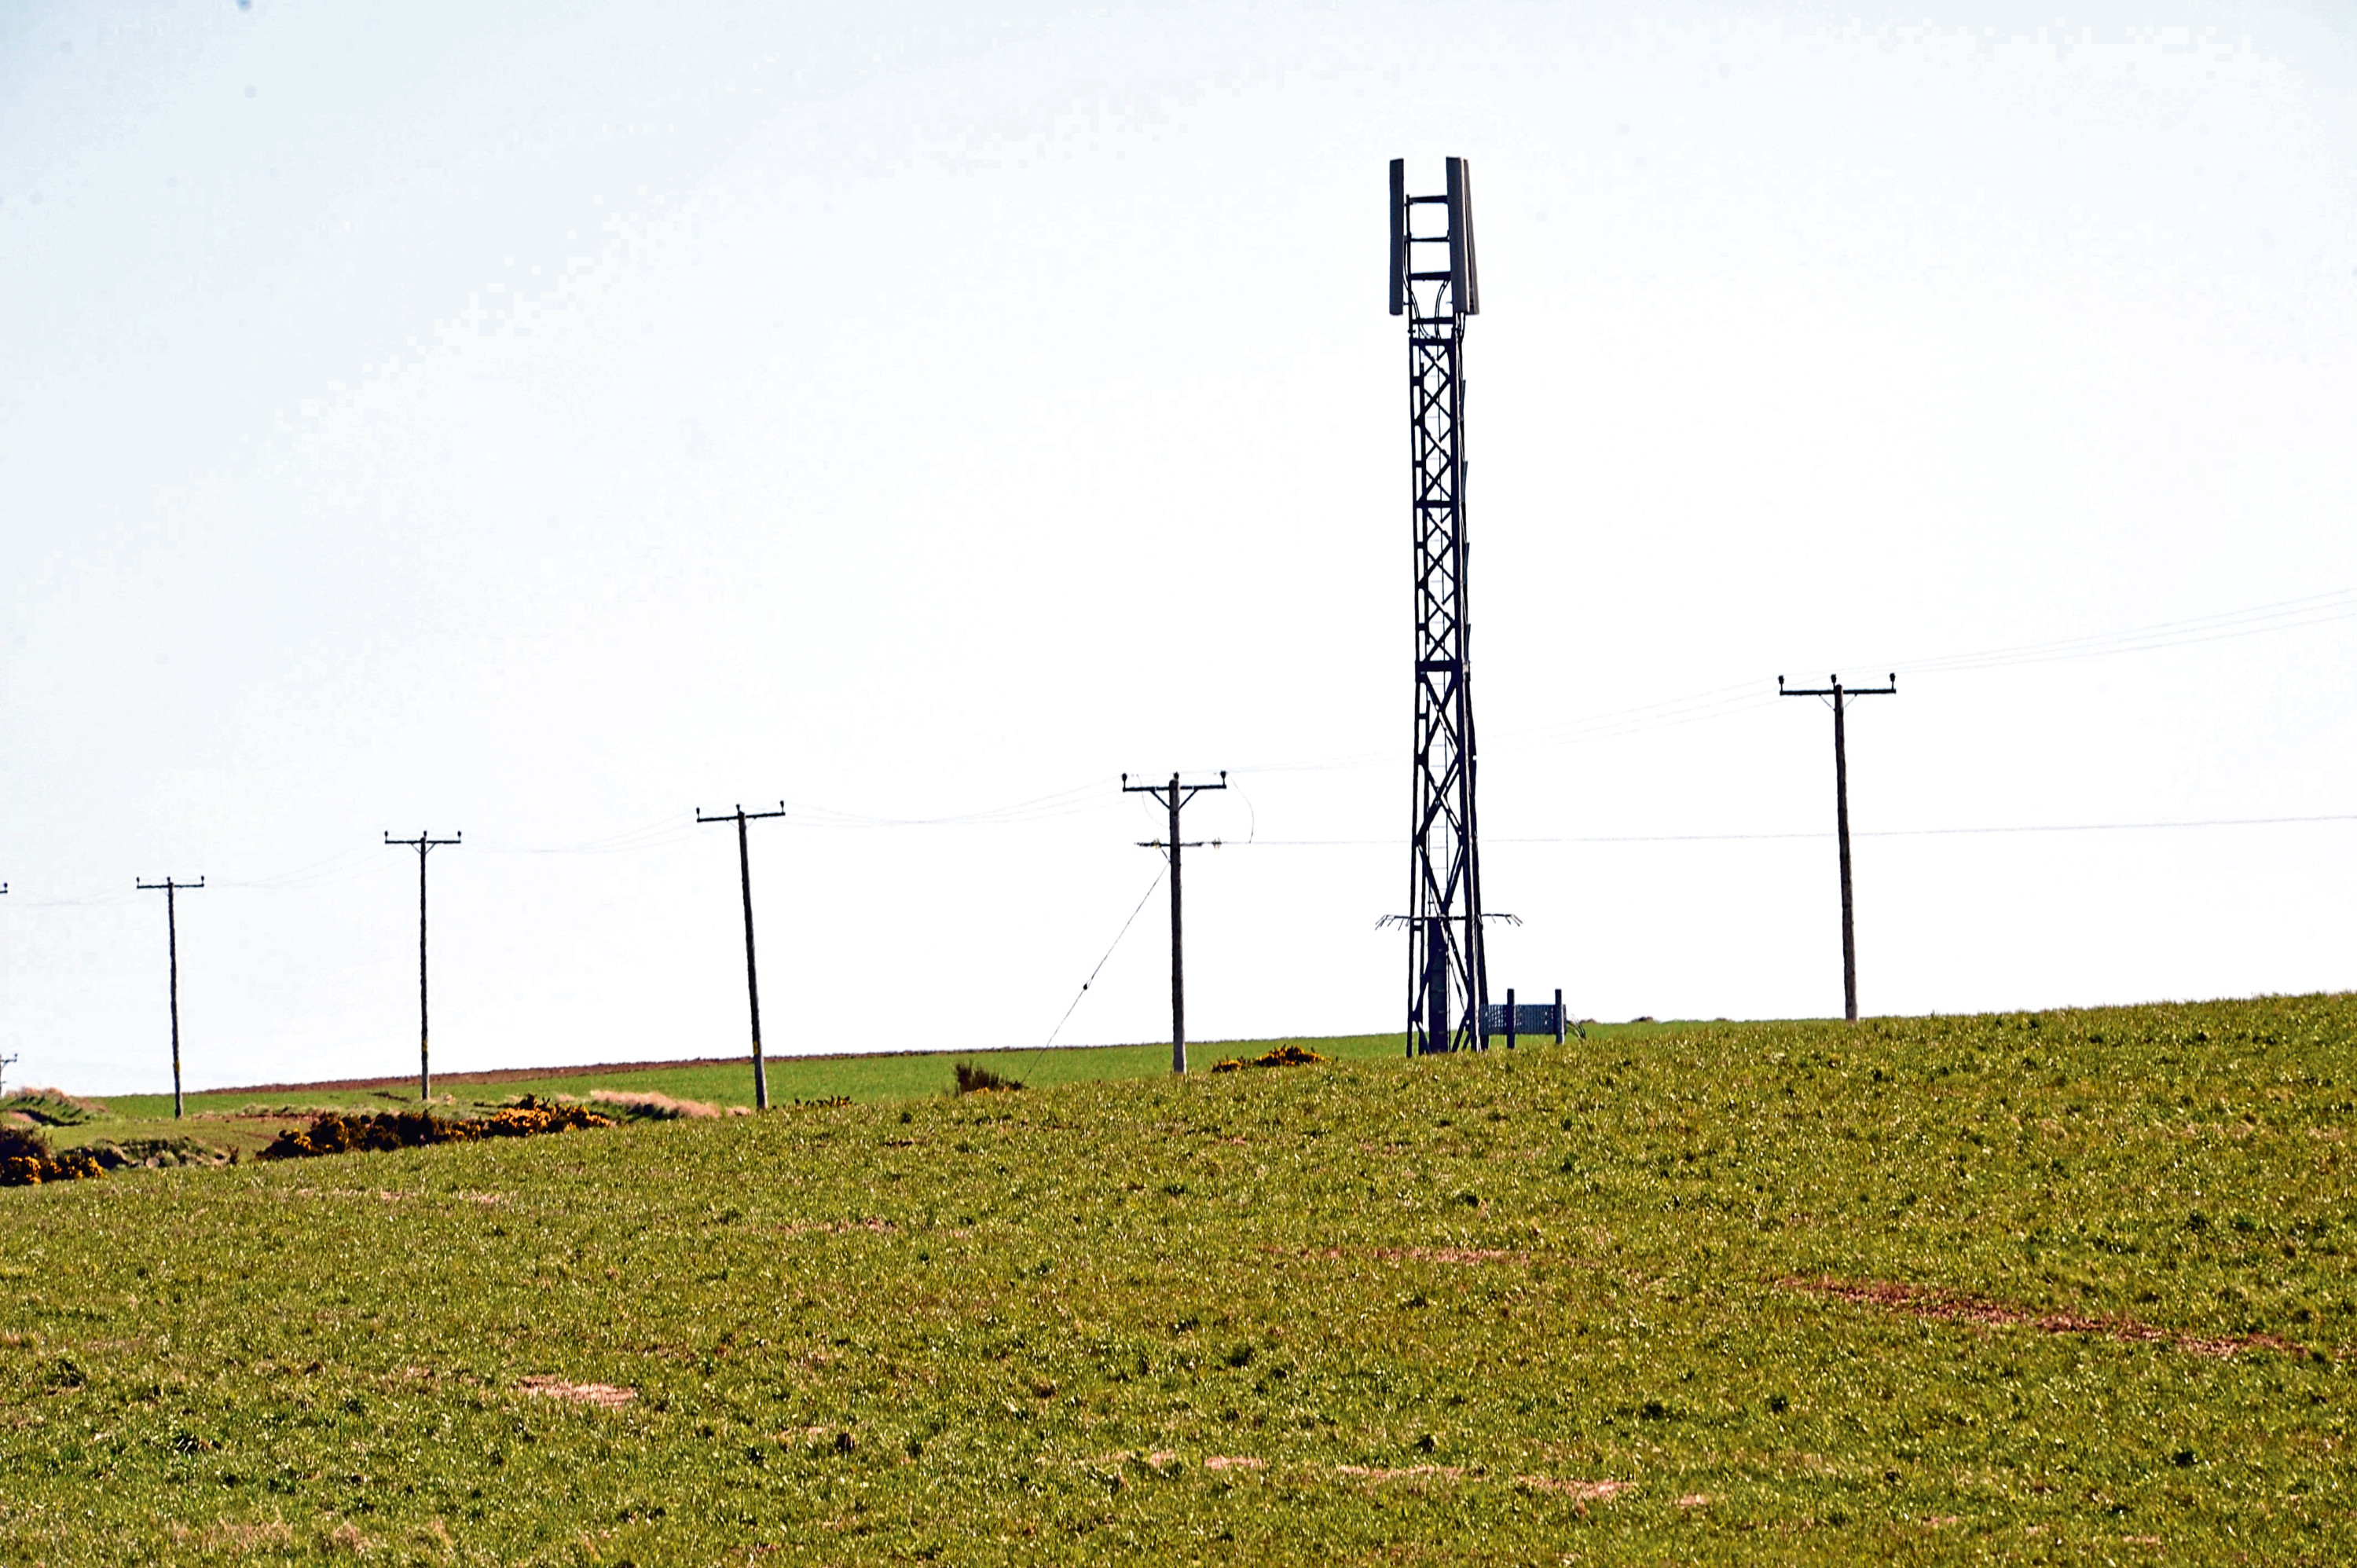 The rent being offered to host a mobile phone mast on farmland is substantially lower than before.